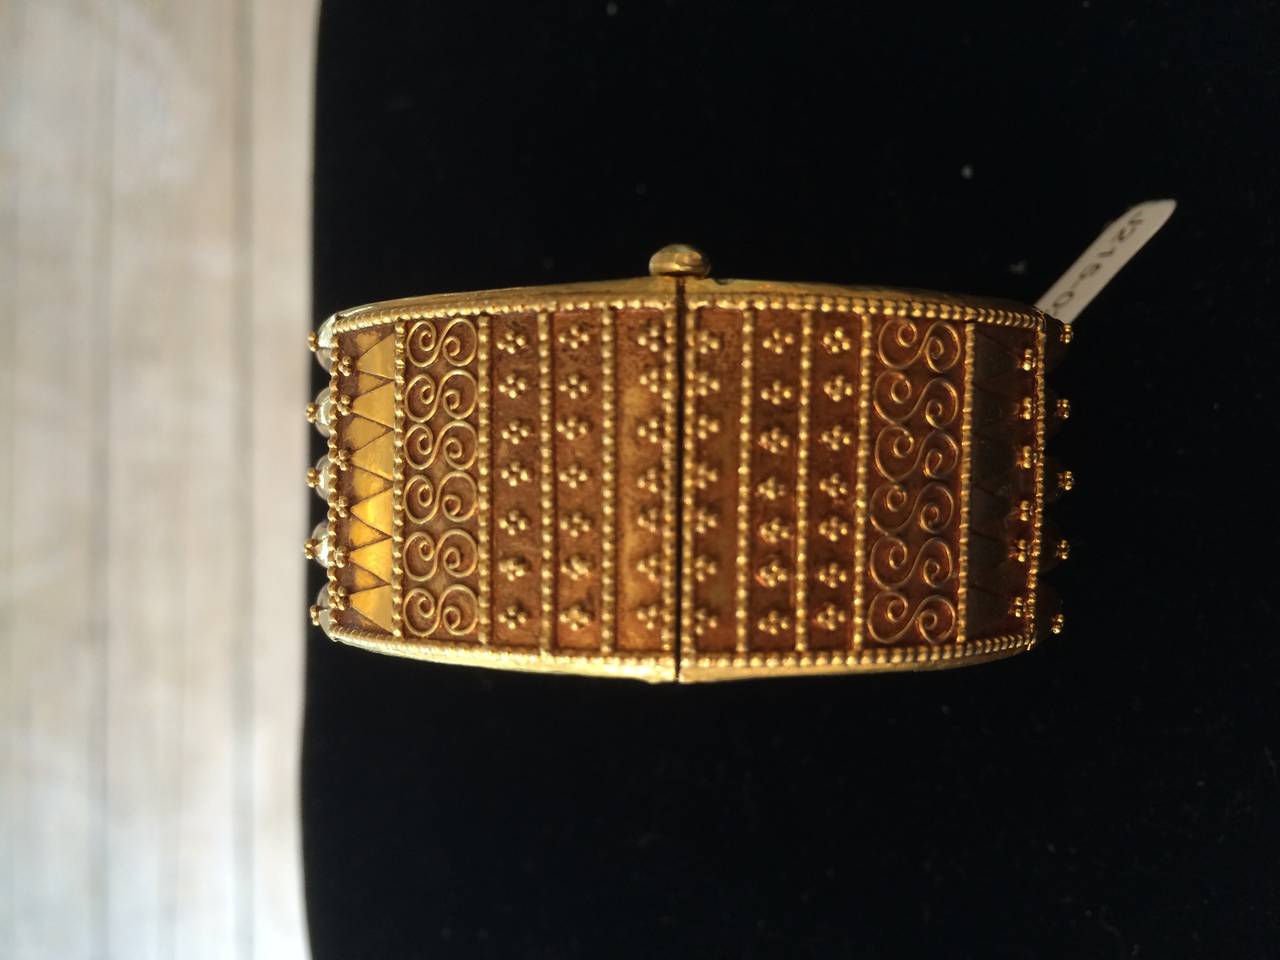 This is a spectacular 22K gold bracelet, hinged with a pull pin clasp.  It features fine granulation and filigree work .  Both the top and the bottom of the bracelet have this fine detailing.  The pin on the clasp has a stop so that it will not